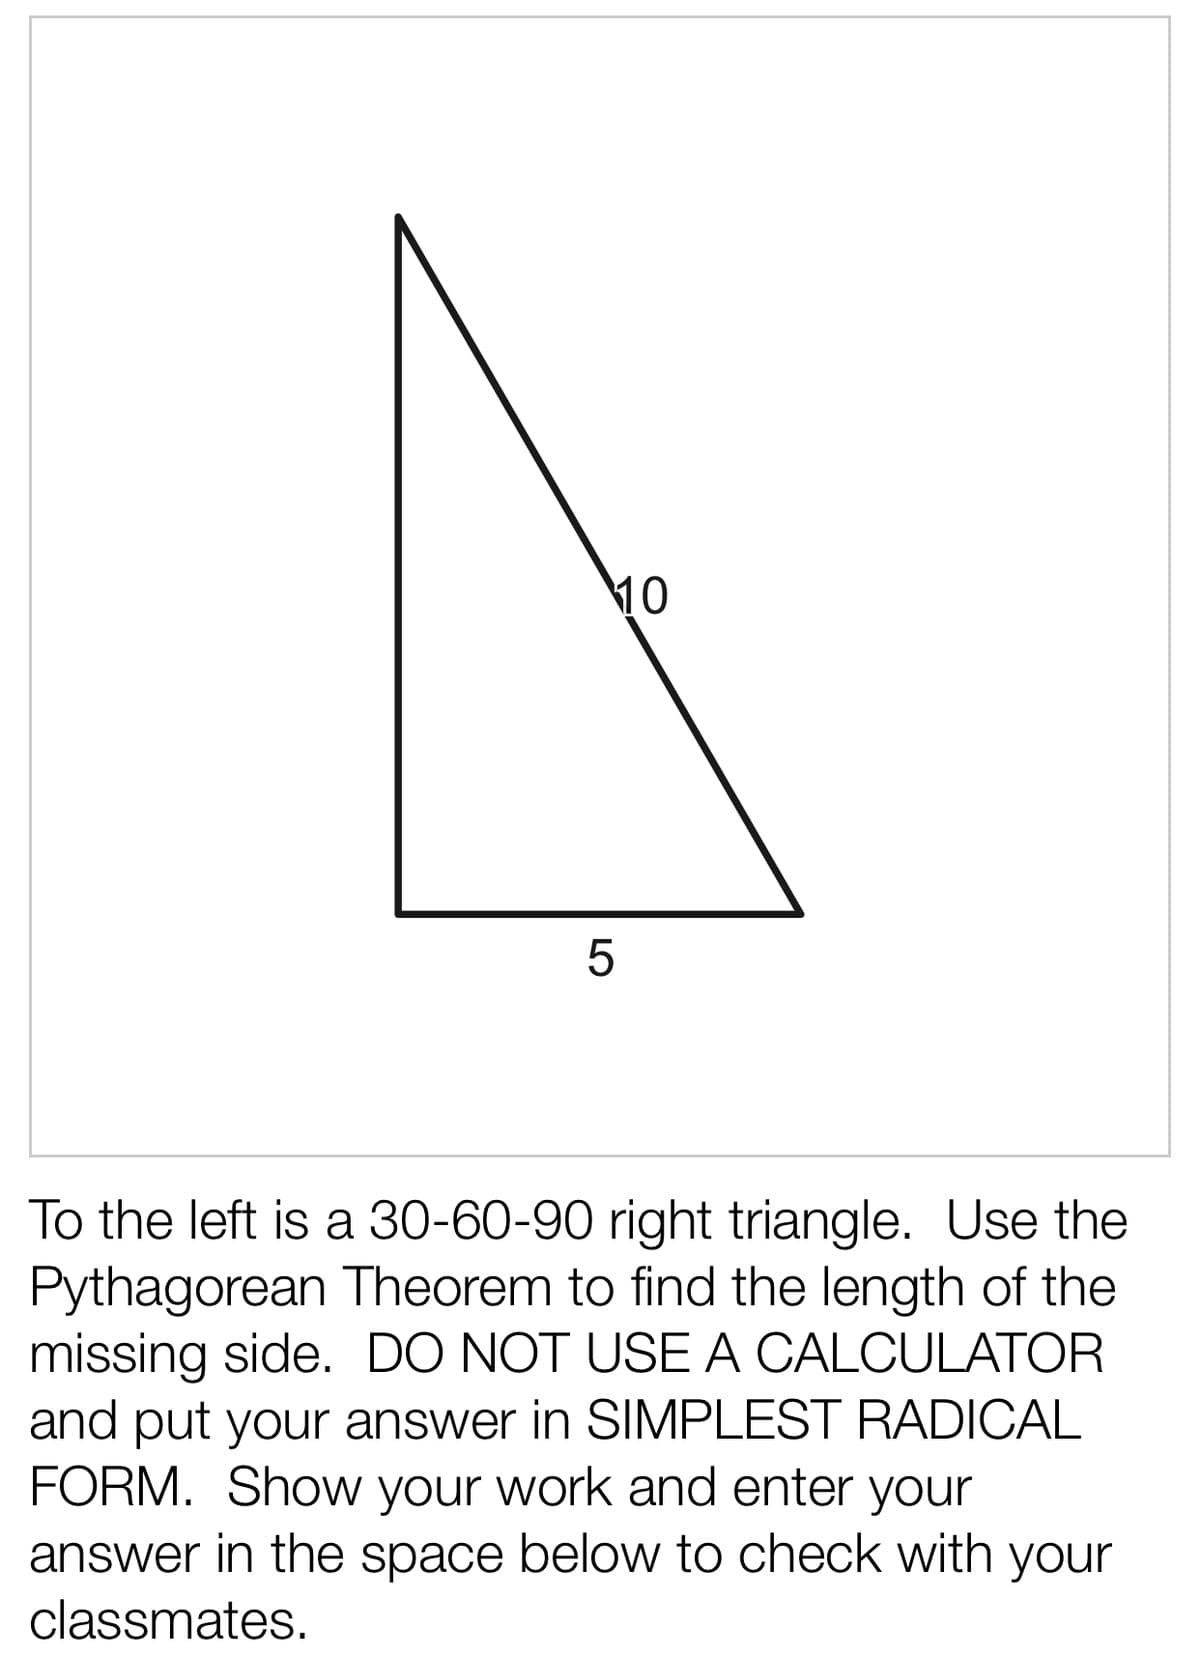 10
To the left is a 30-60-90 right triangle. Use the
Pythagorean Theorem to find the length of the
missing side. DO NOT USE A CALCULATOR
and put your answer in SIMPLEST RADICAL
FORM. Show your work and enter your
answer in the space below to check with your
classmates.
